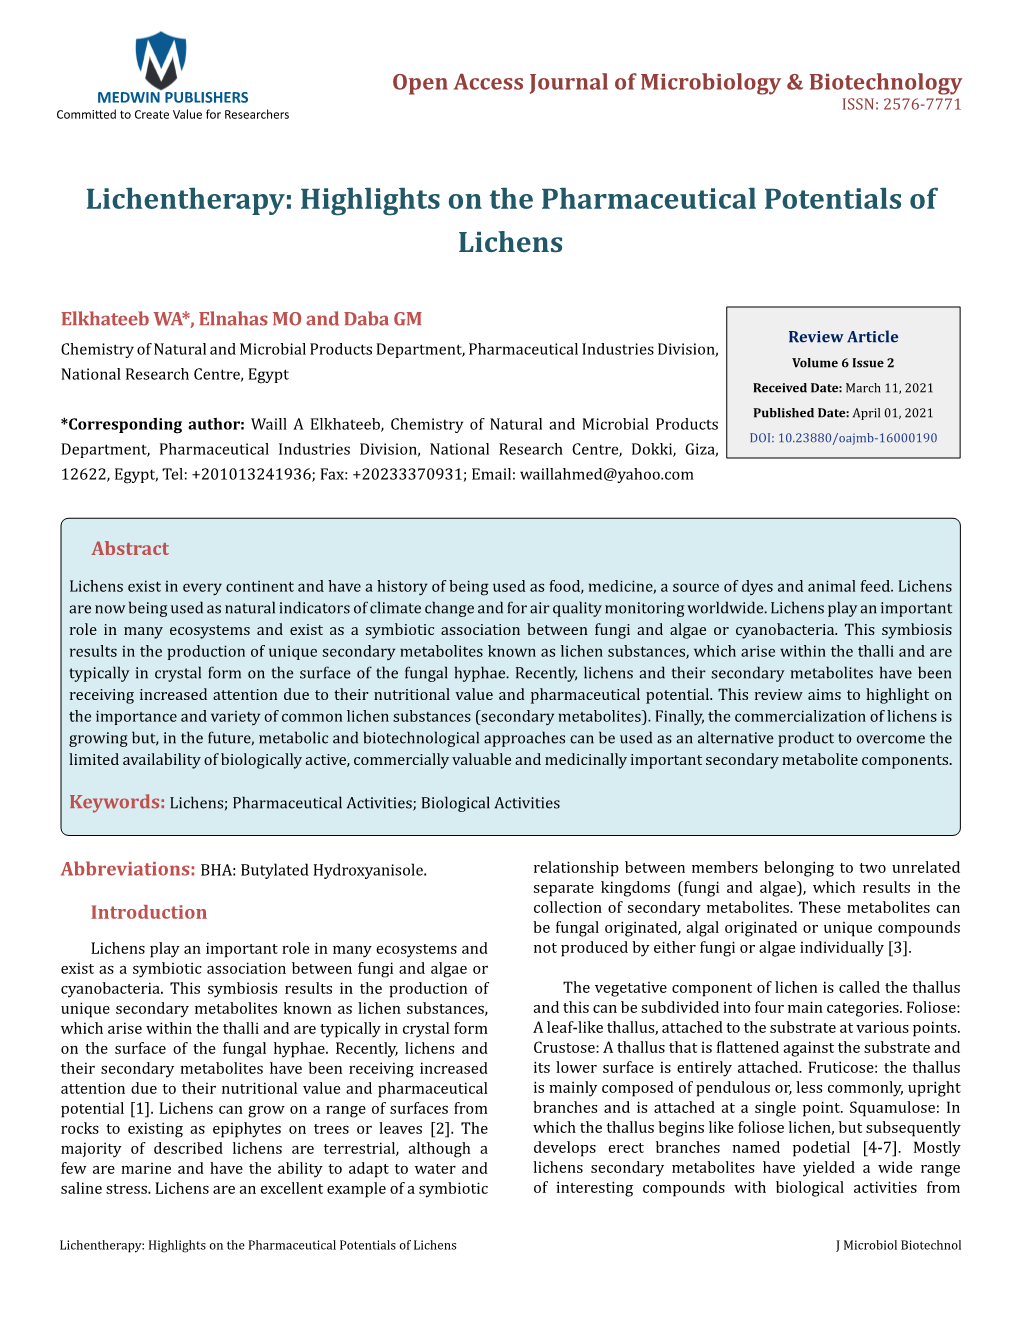 Lichentherapy: Highlights on the Pharmaceutical Potentials of Lichens